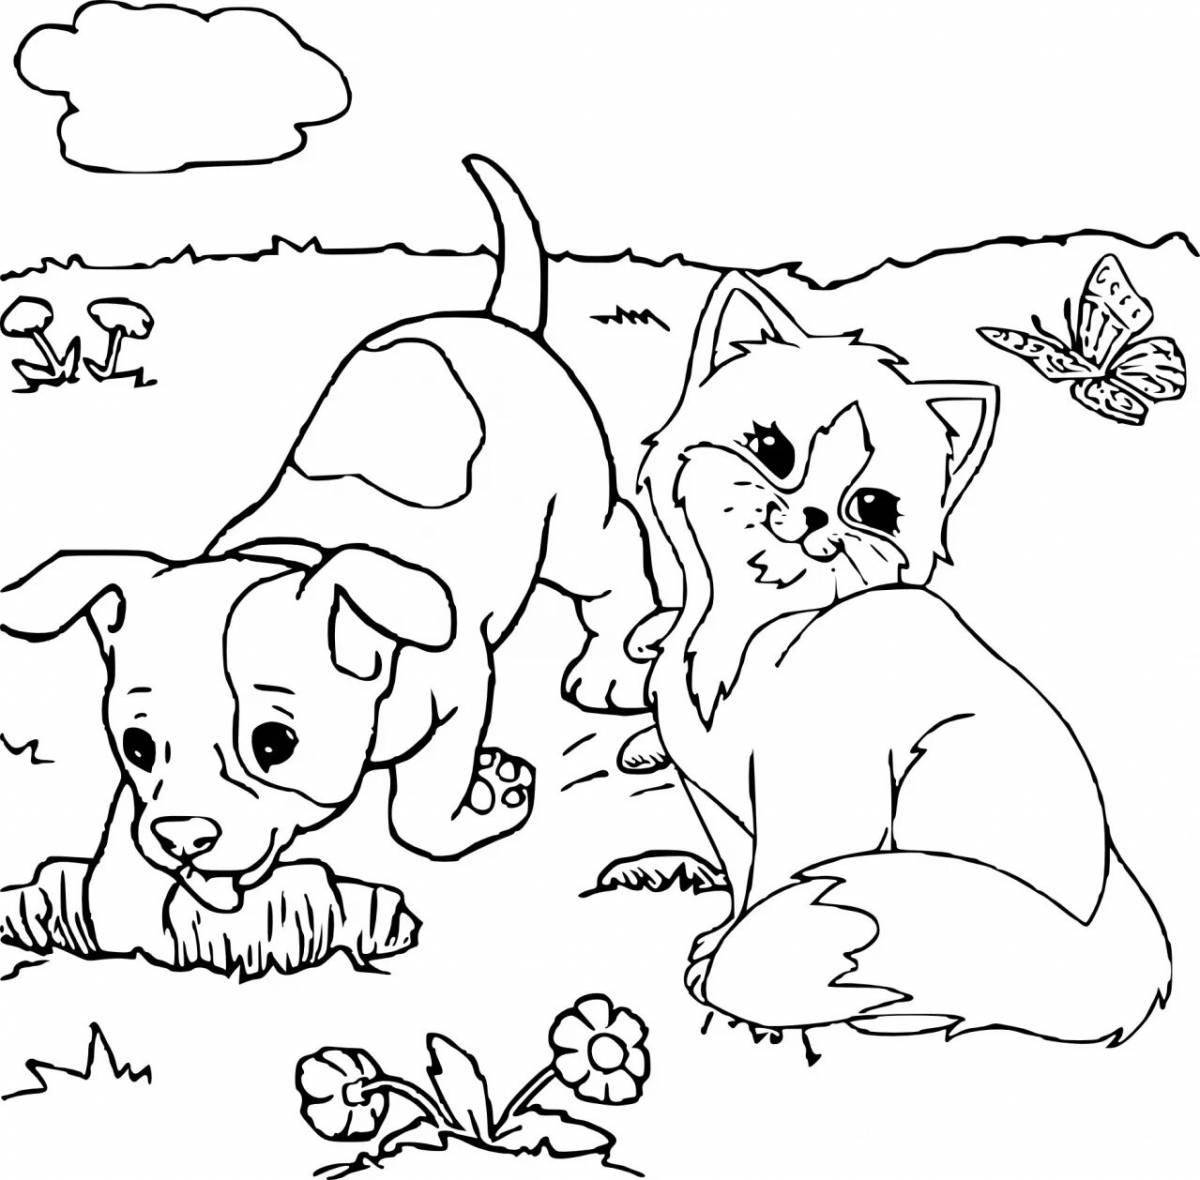 Fun coloring book for children 5 years old pets